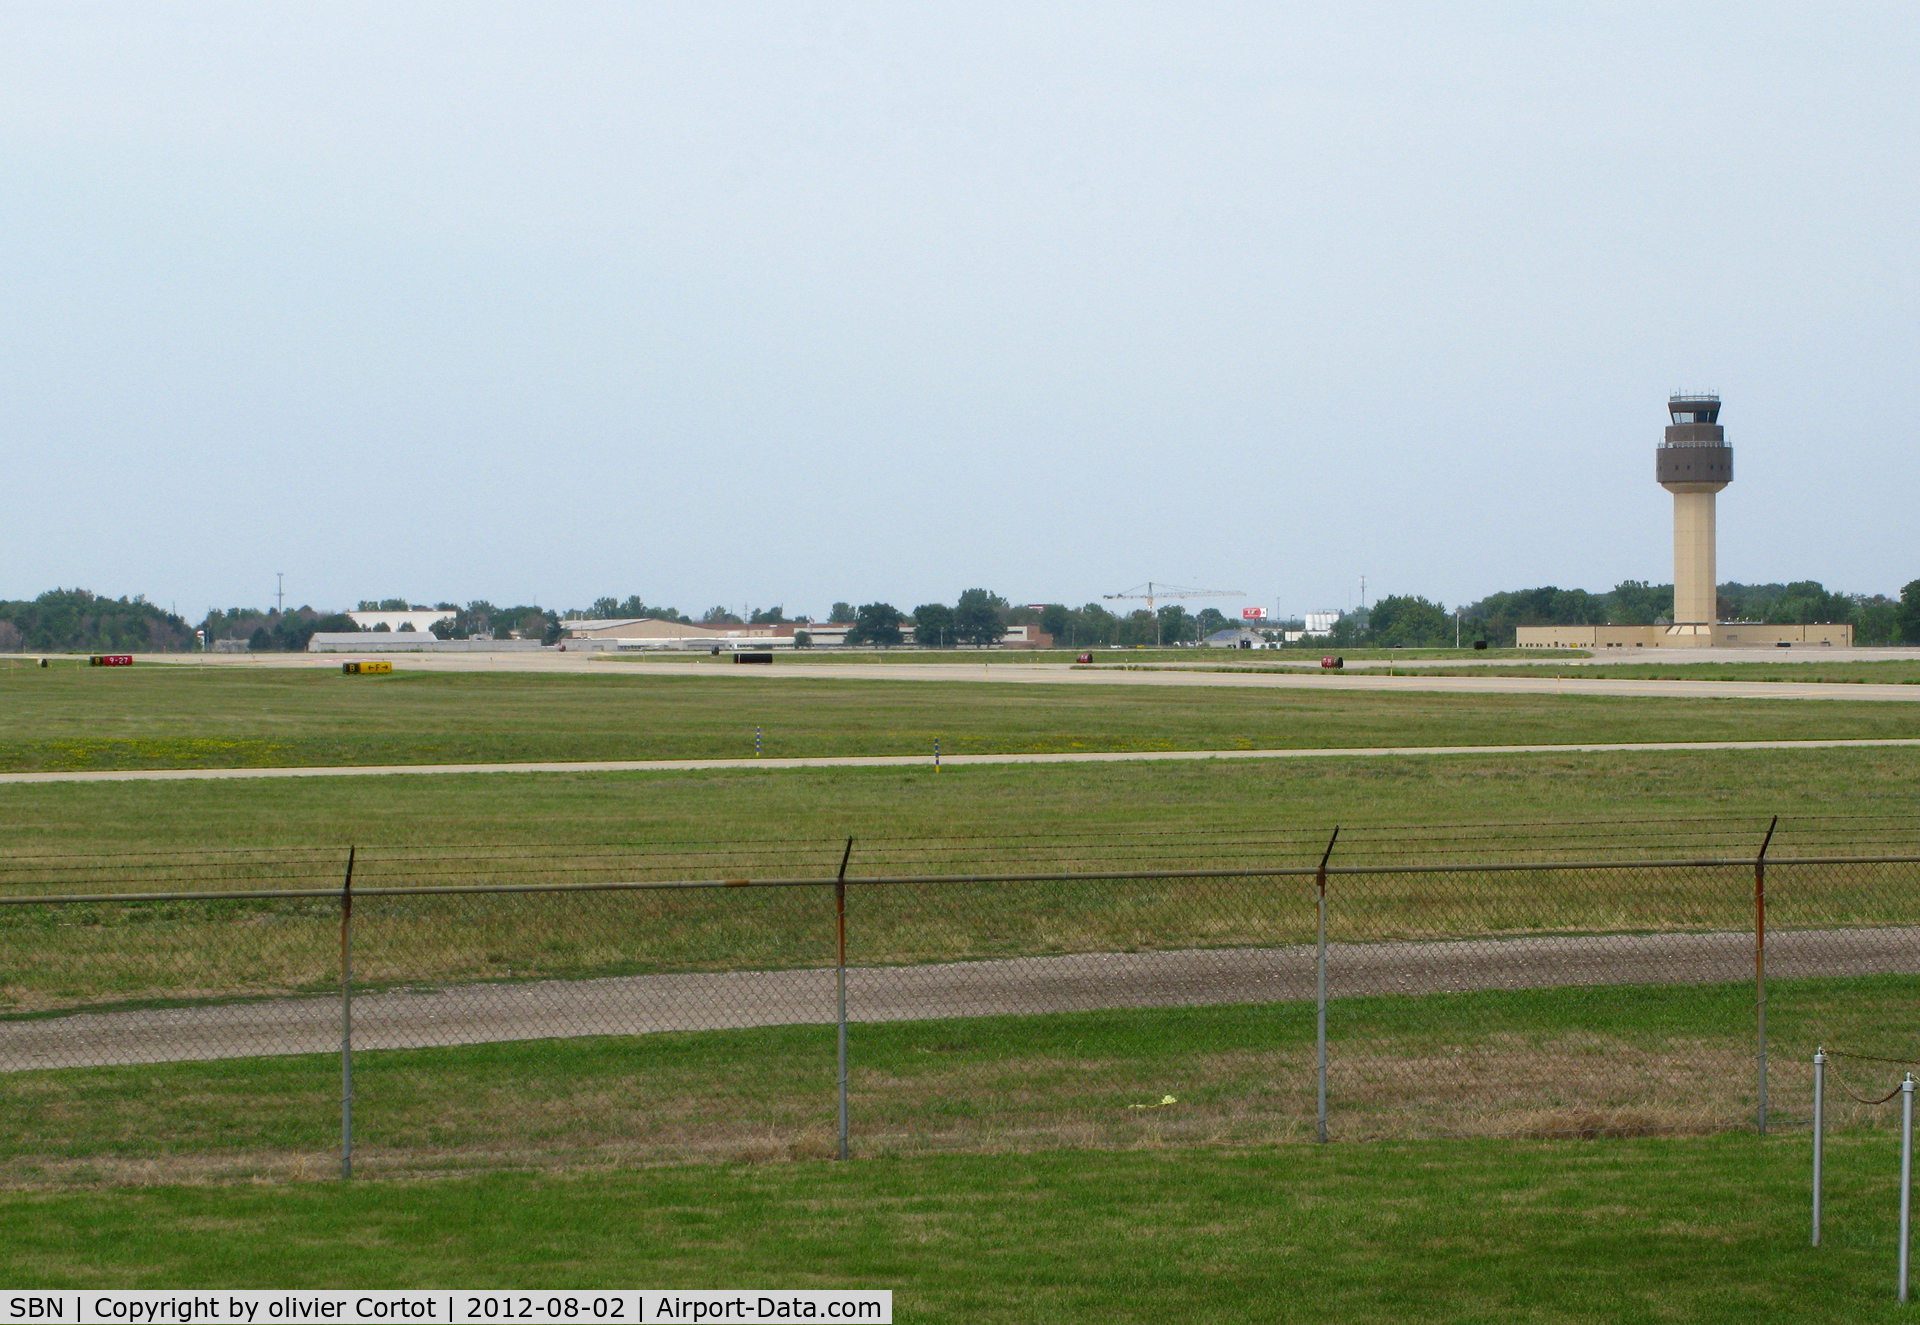 South Bend Airport (SBN) - didn't see a lot of traffic when I visited the area